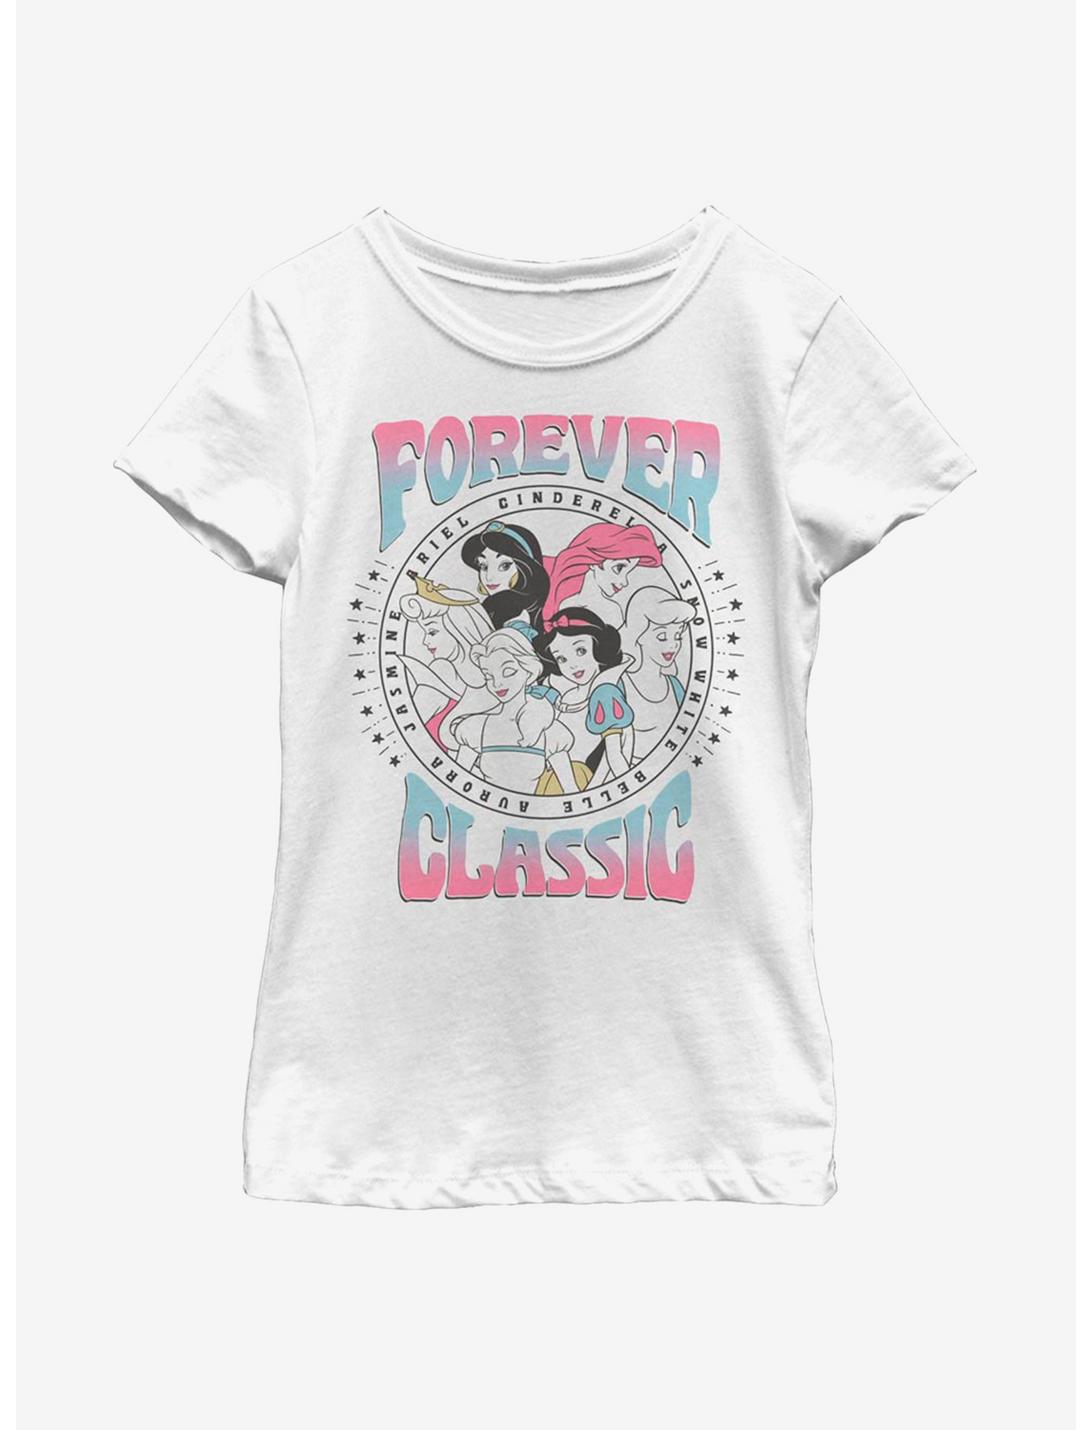 Disney Princesses Forever Classic Youth Girls T-Shirt, WHITE, hi-res